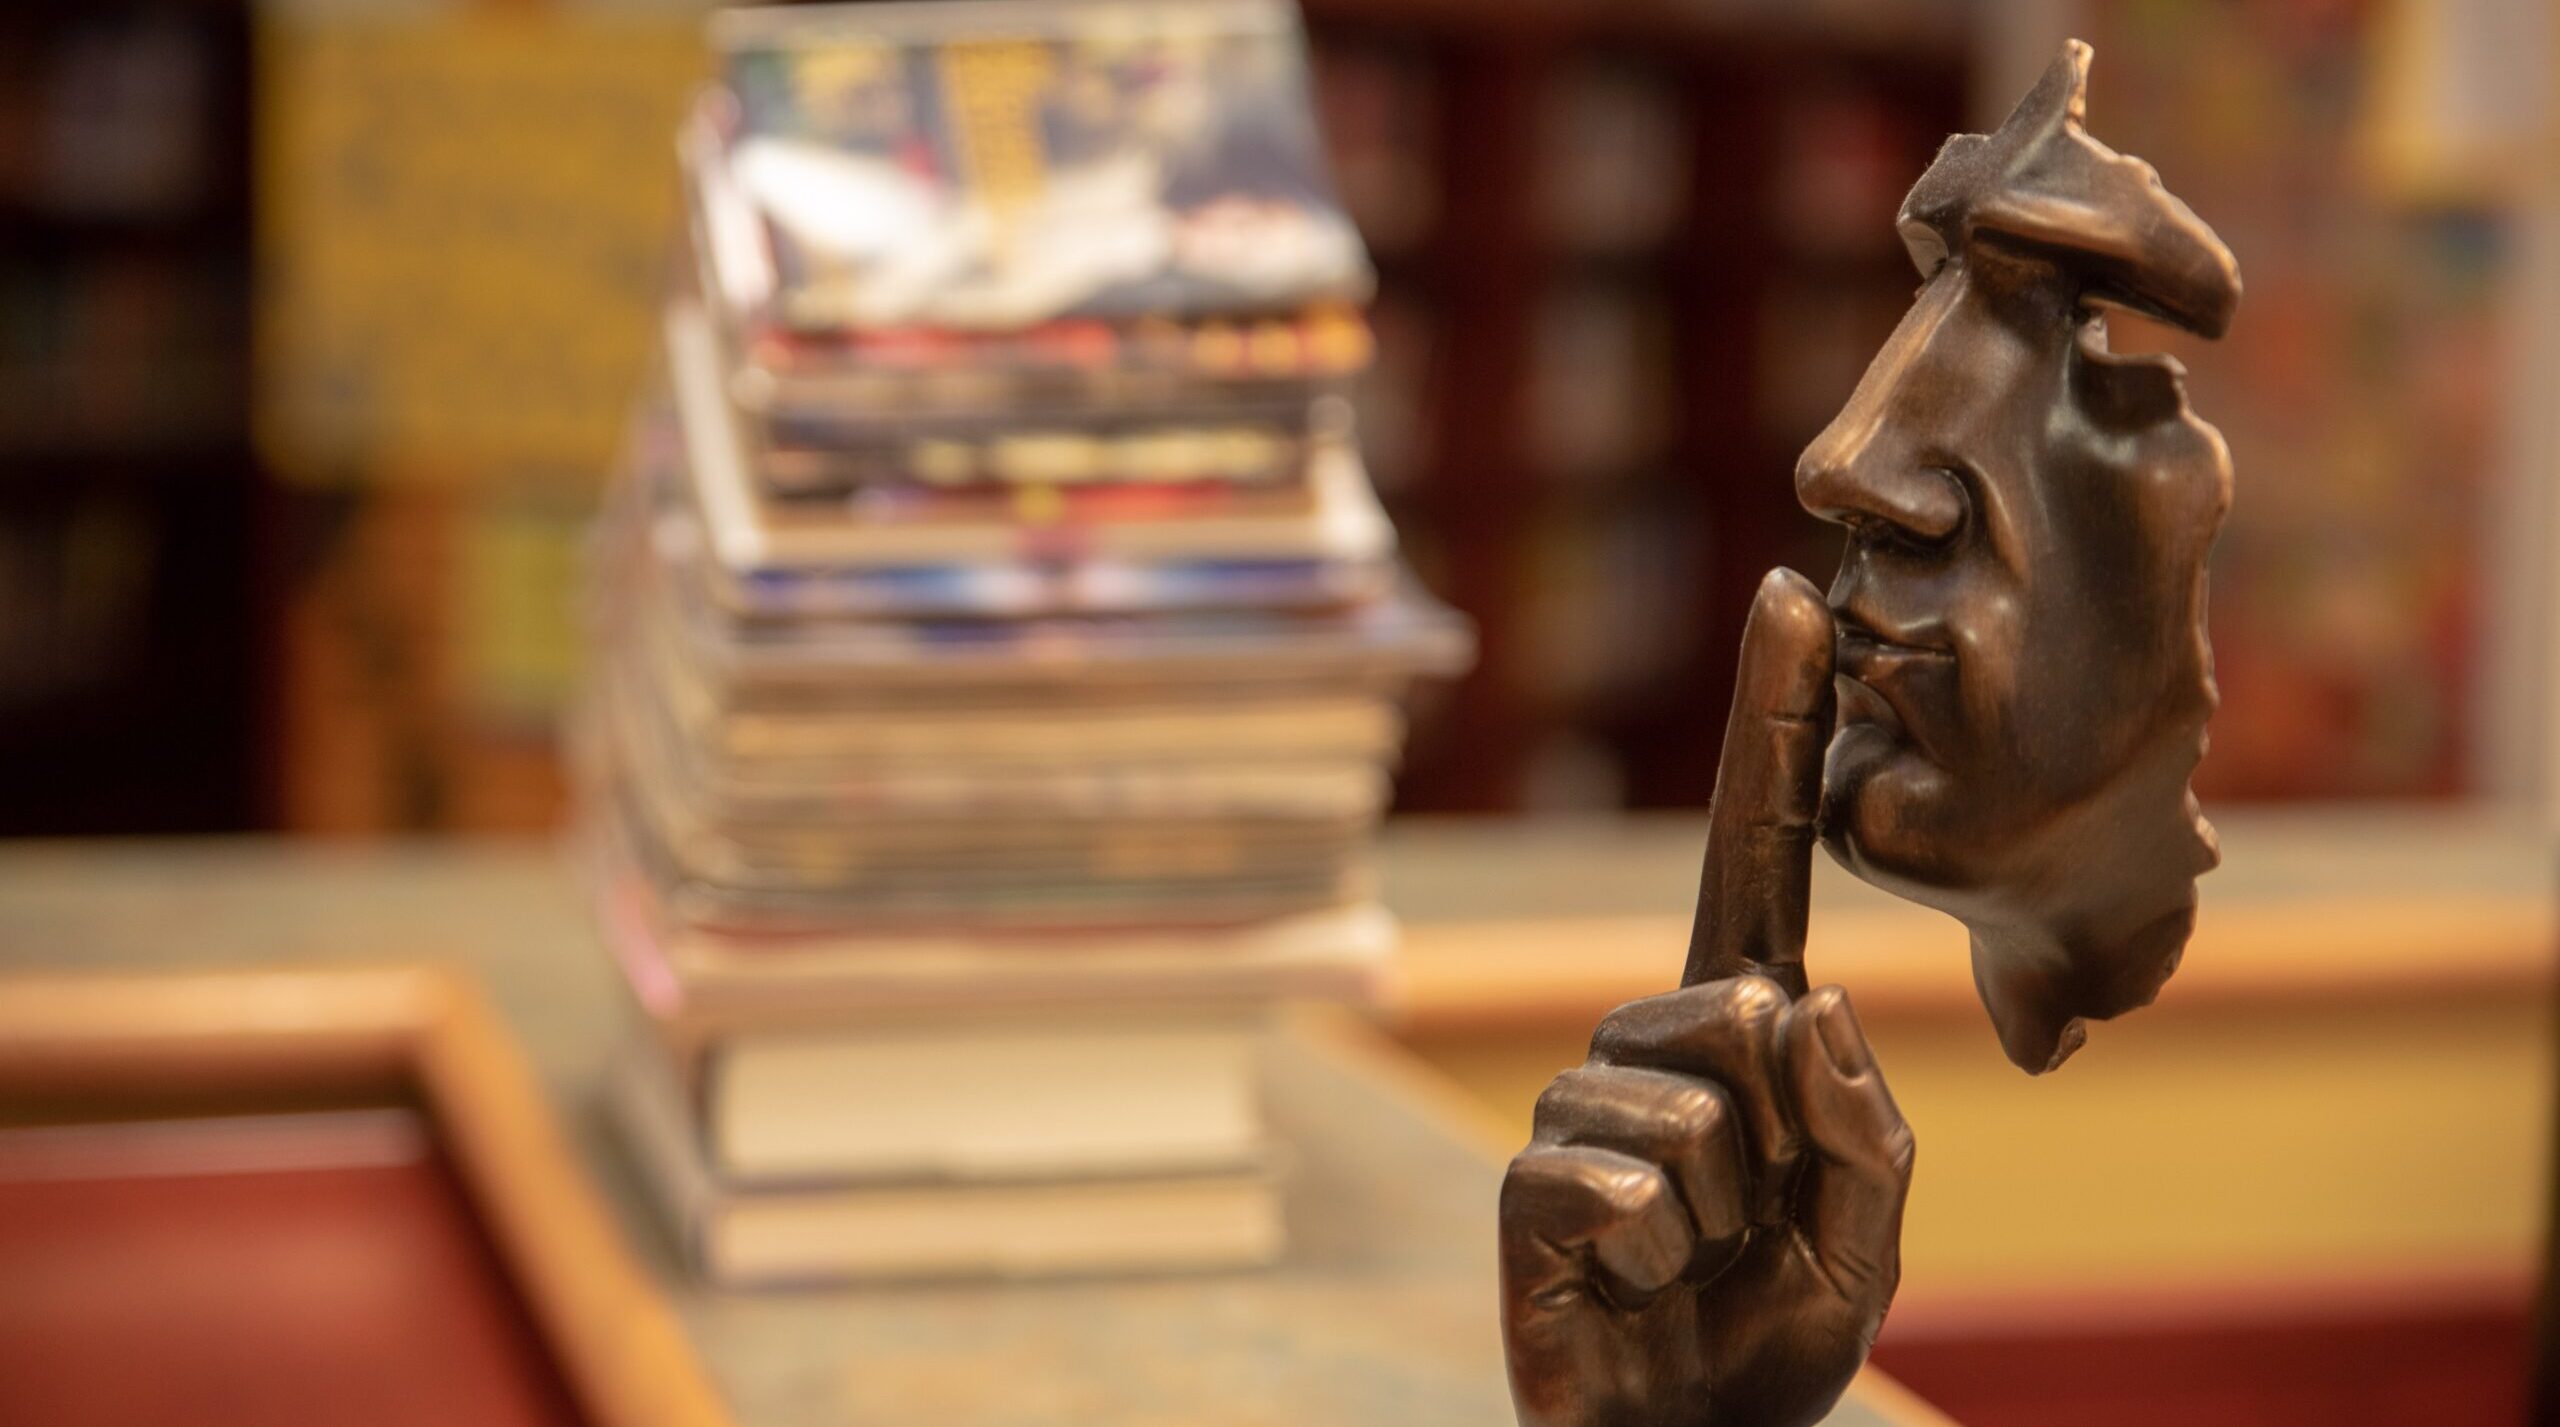 A small statue of a shushing finger in front of a face rests on a shelf. In the background, stacks of books. What information do we lose by removing sound from our texts?